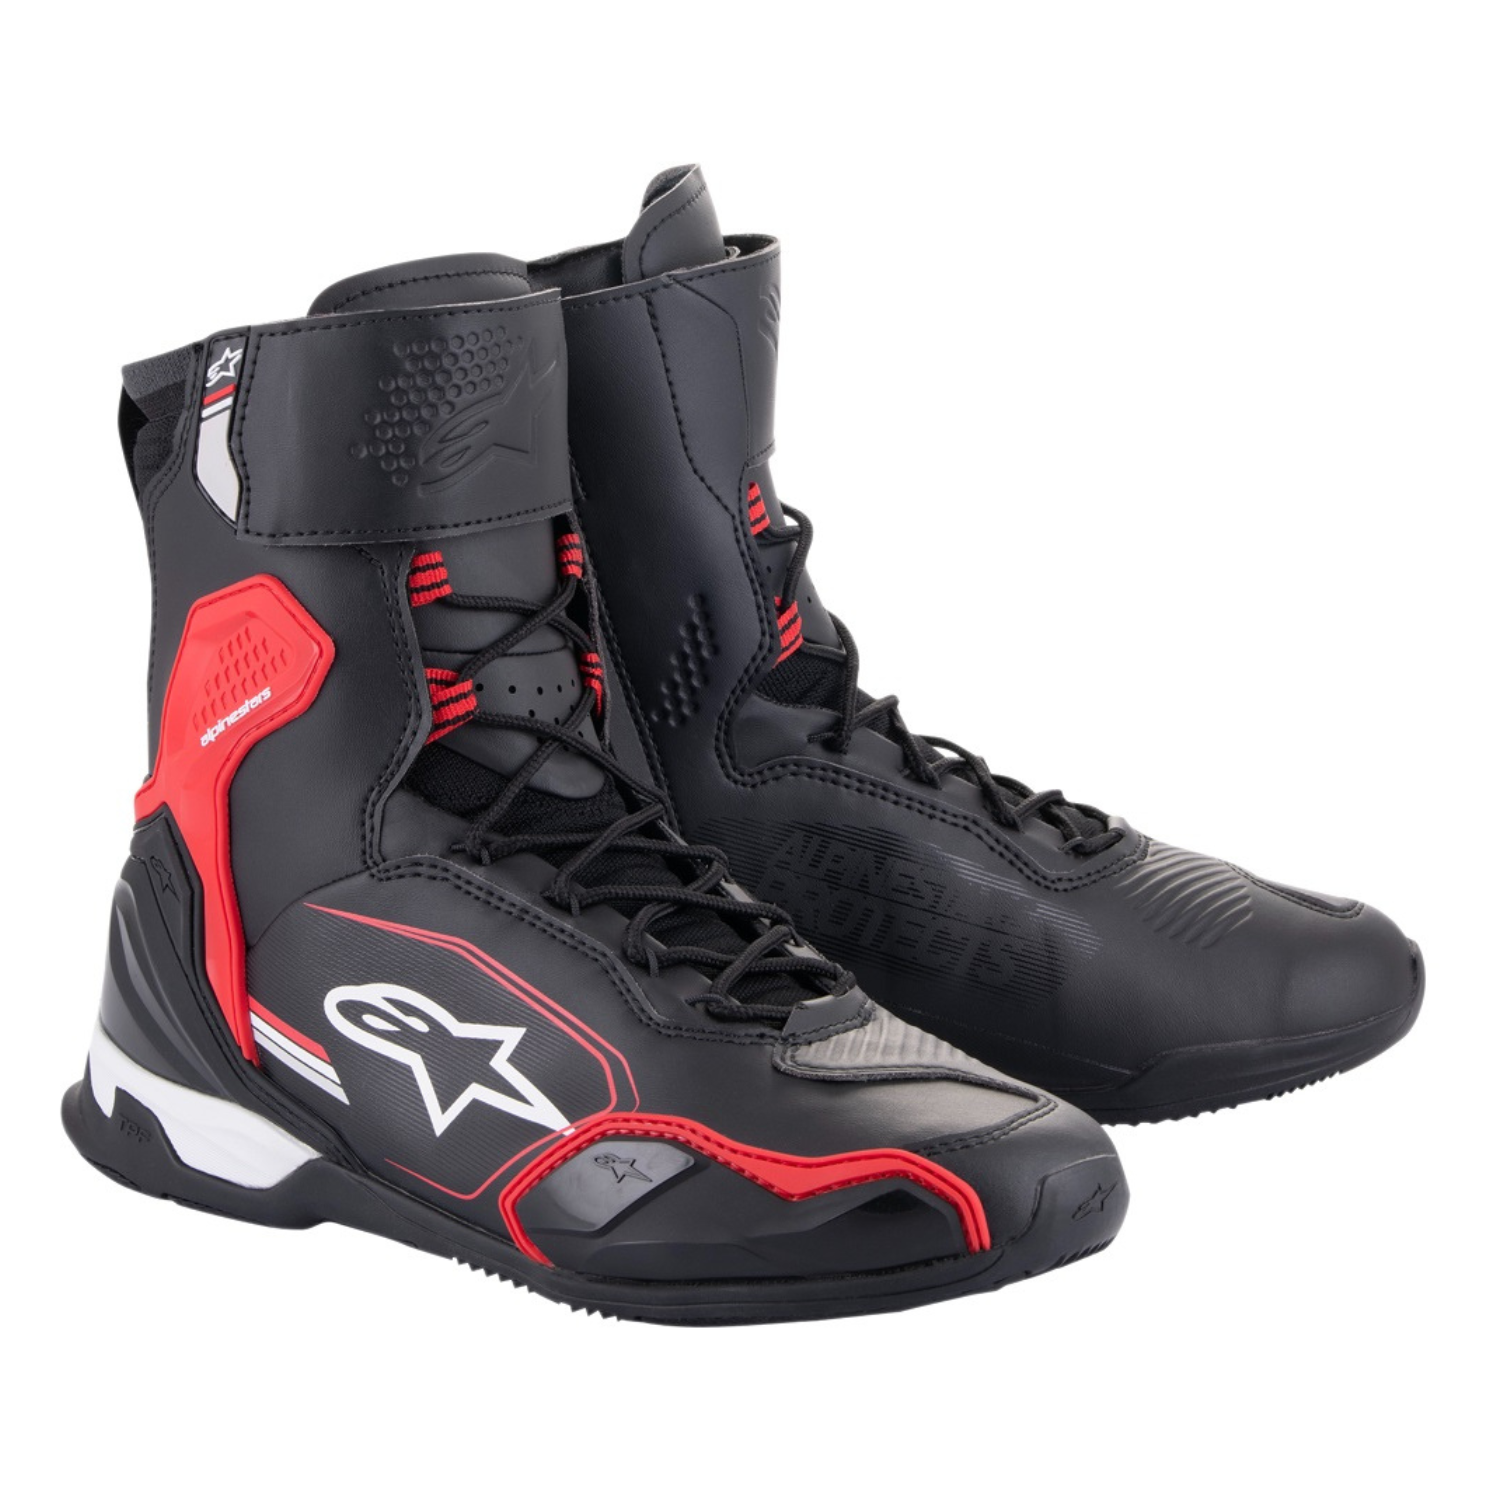 Image of Alpinestars Superfaster Shoes Black Bright Red White Taille US 11